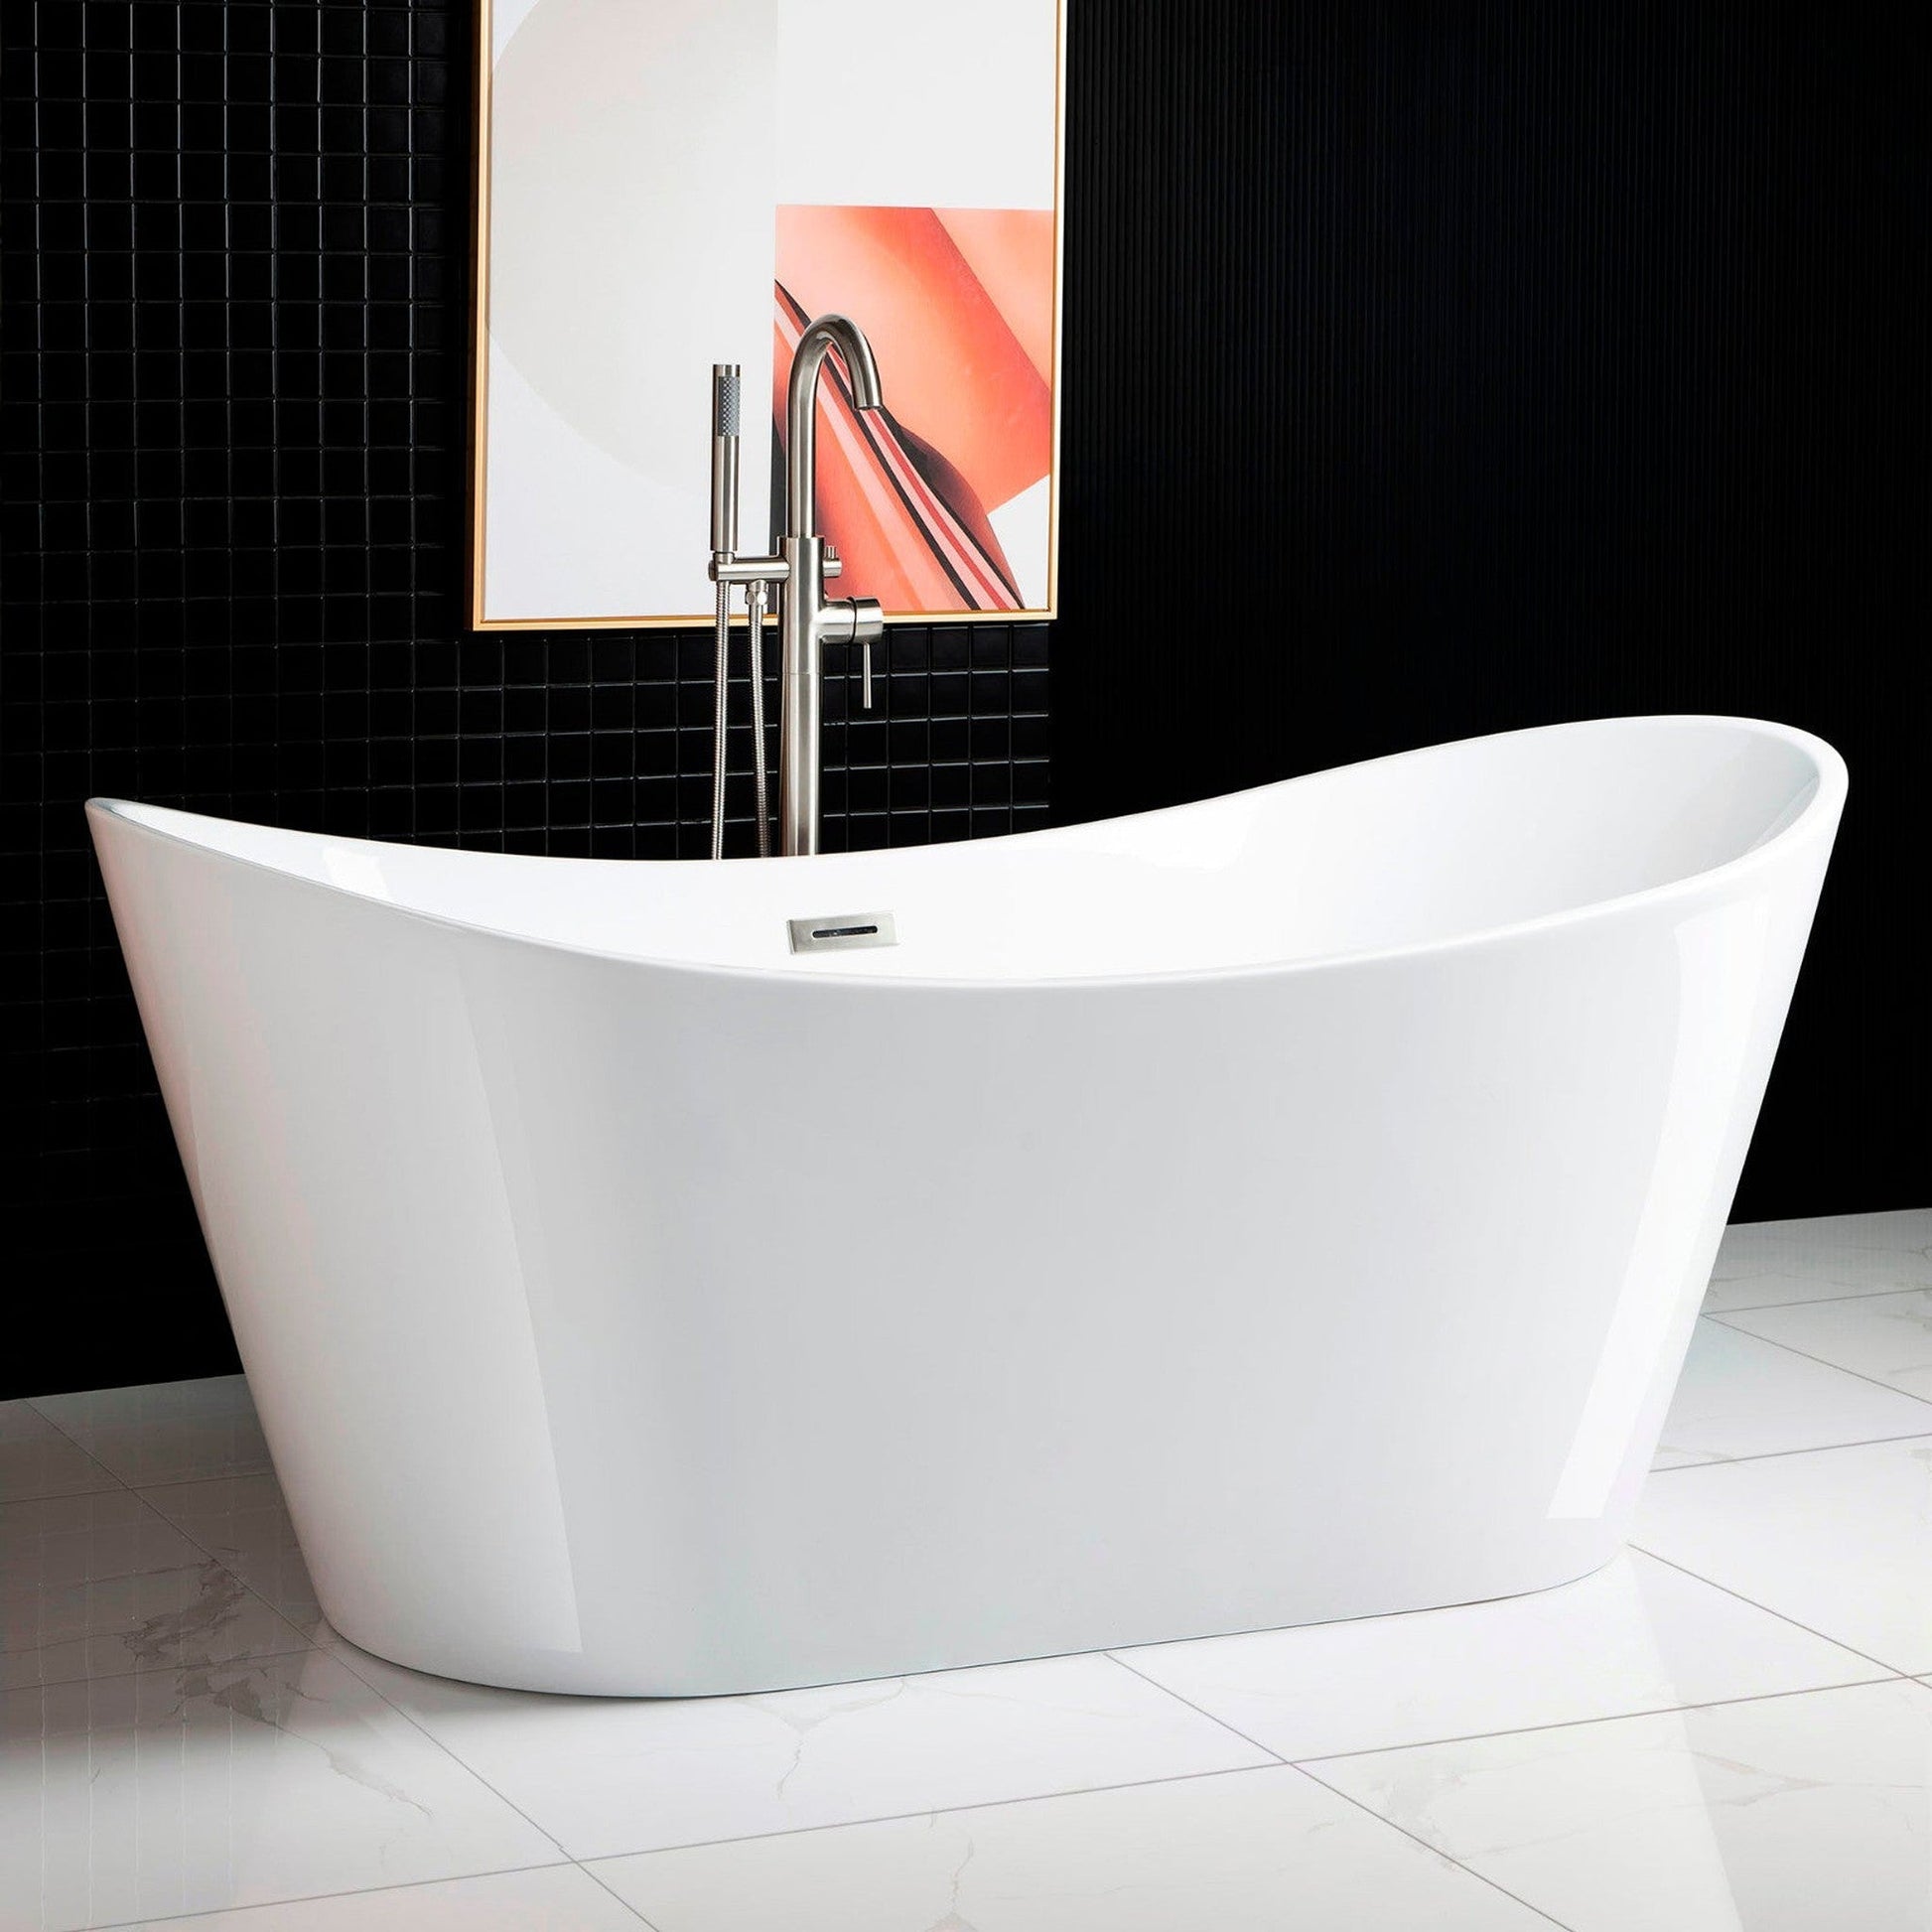 WoodBridge B0010 67" White Acrylic Freestanding Contemporary Soaking Bathtub With Chrome Drain, Overflow, F0071CHVT Tub Filler and Caddy Tray